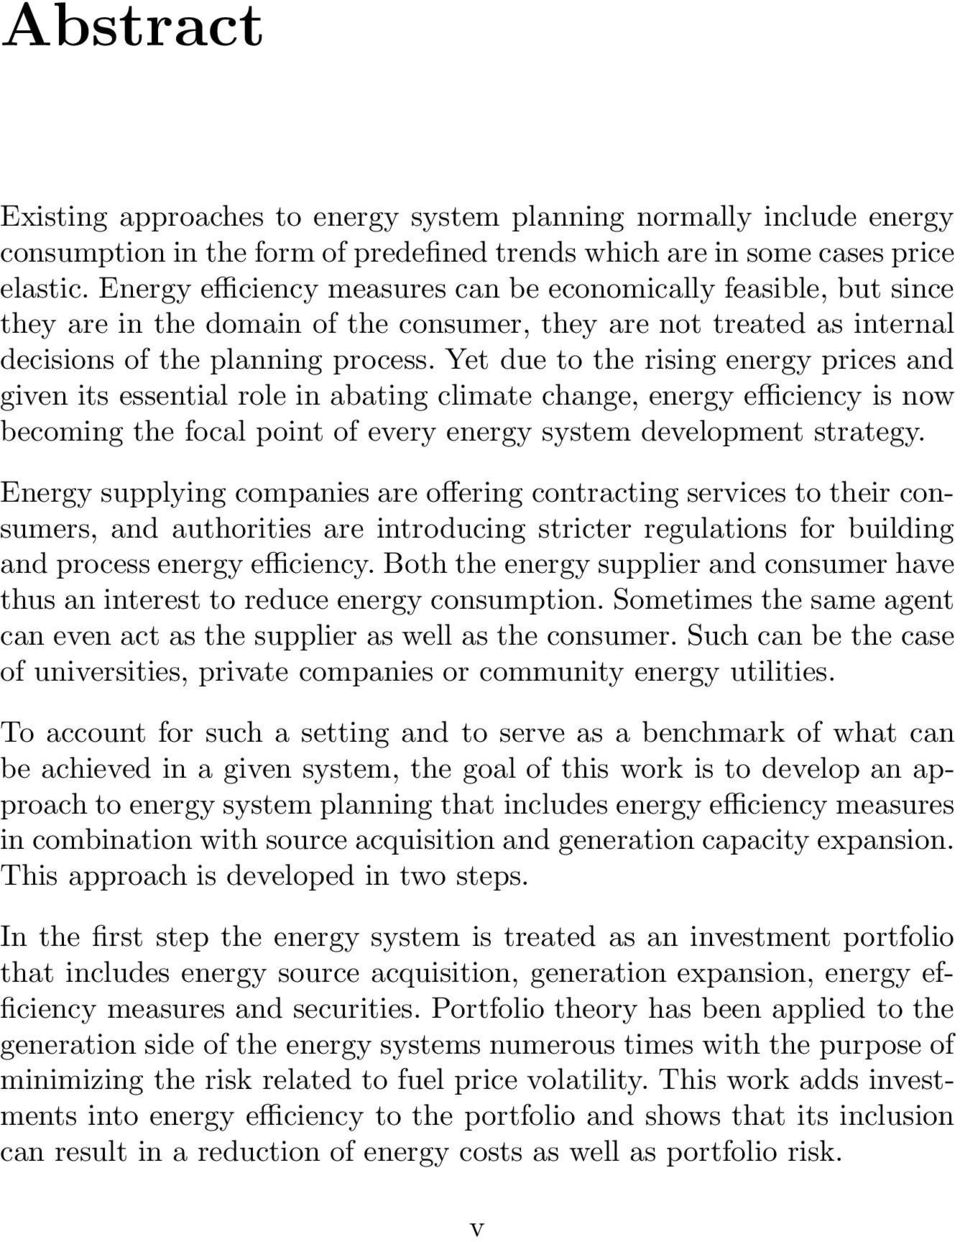 Yet due to the rising energy prices and given its essential role in abating climate change, energy efficiency is now becoming the focal point of every energy system development strategy.